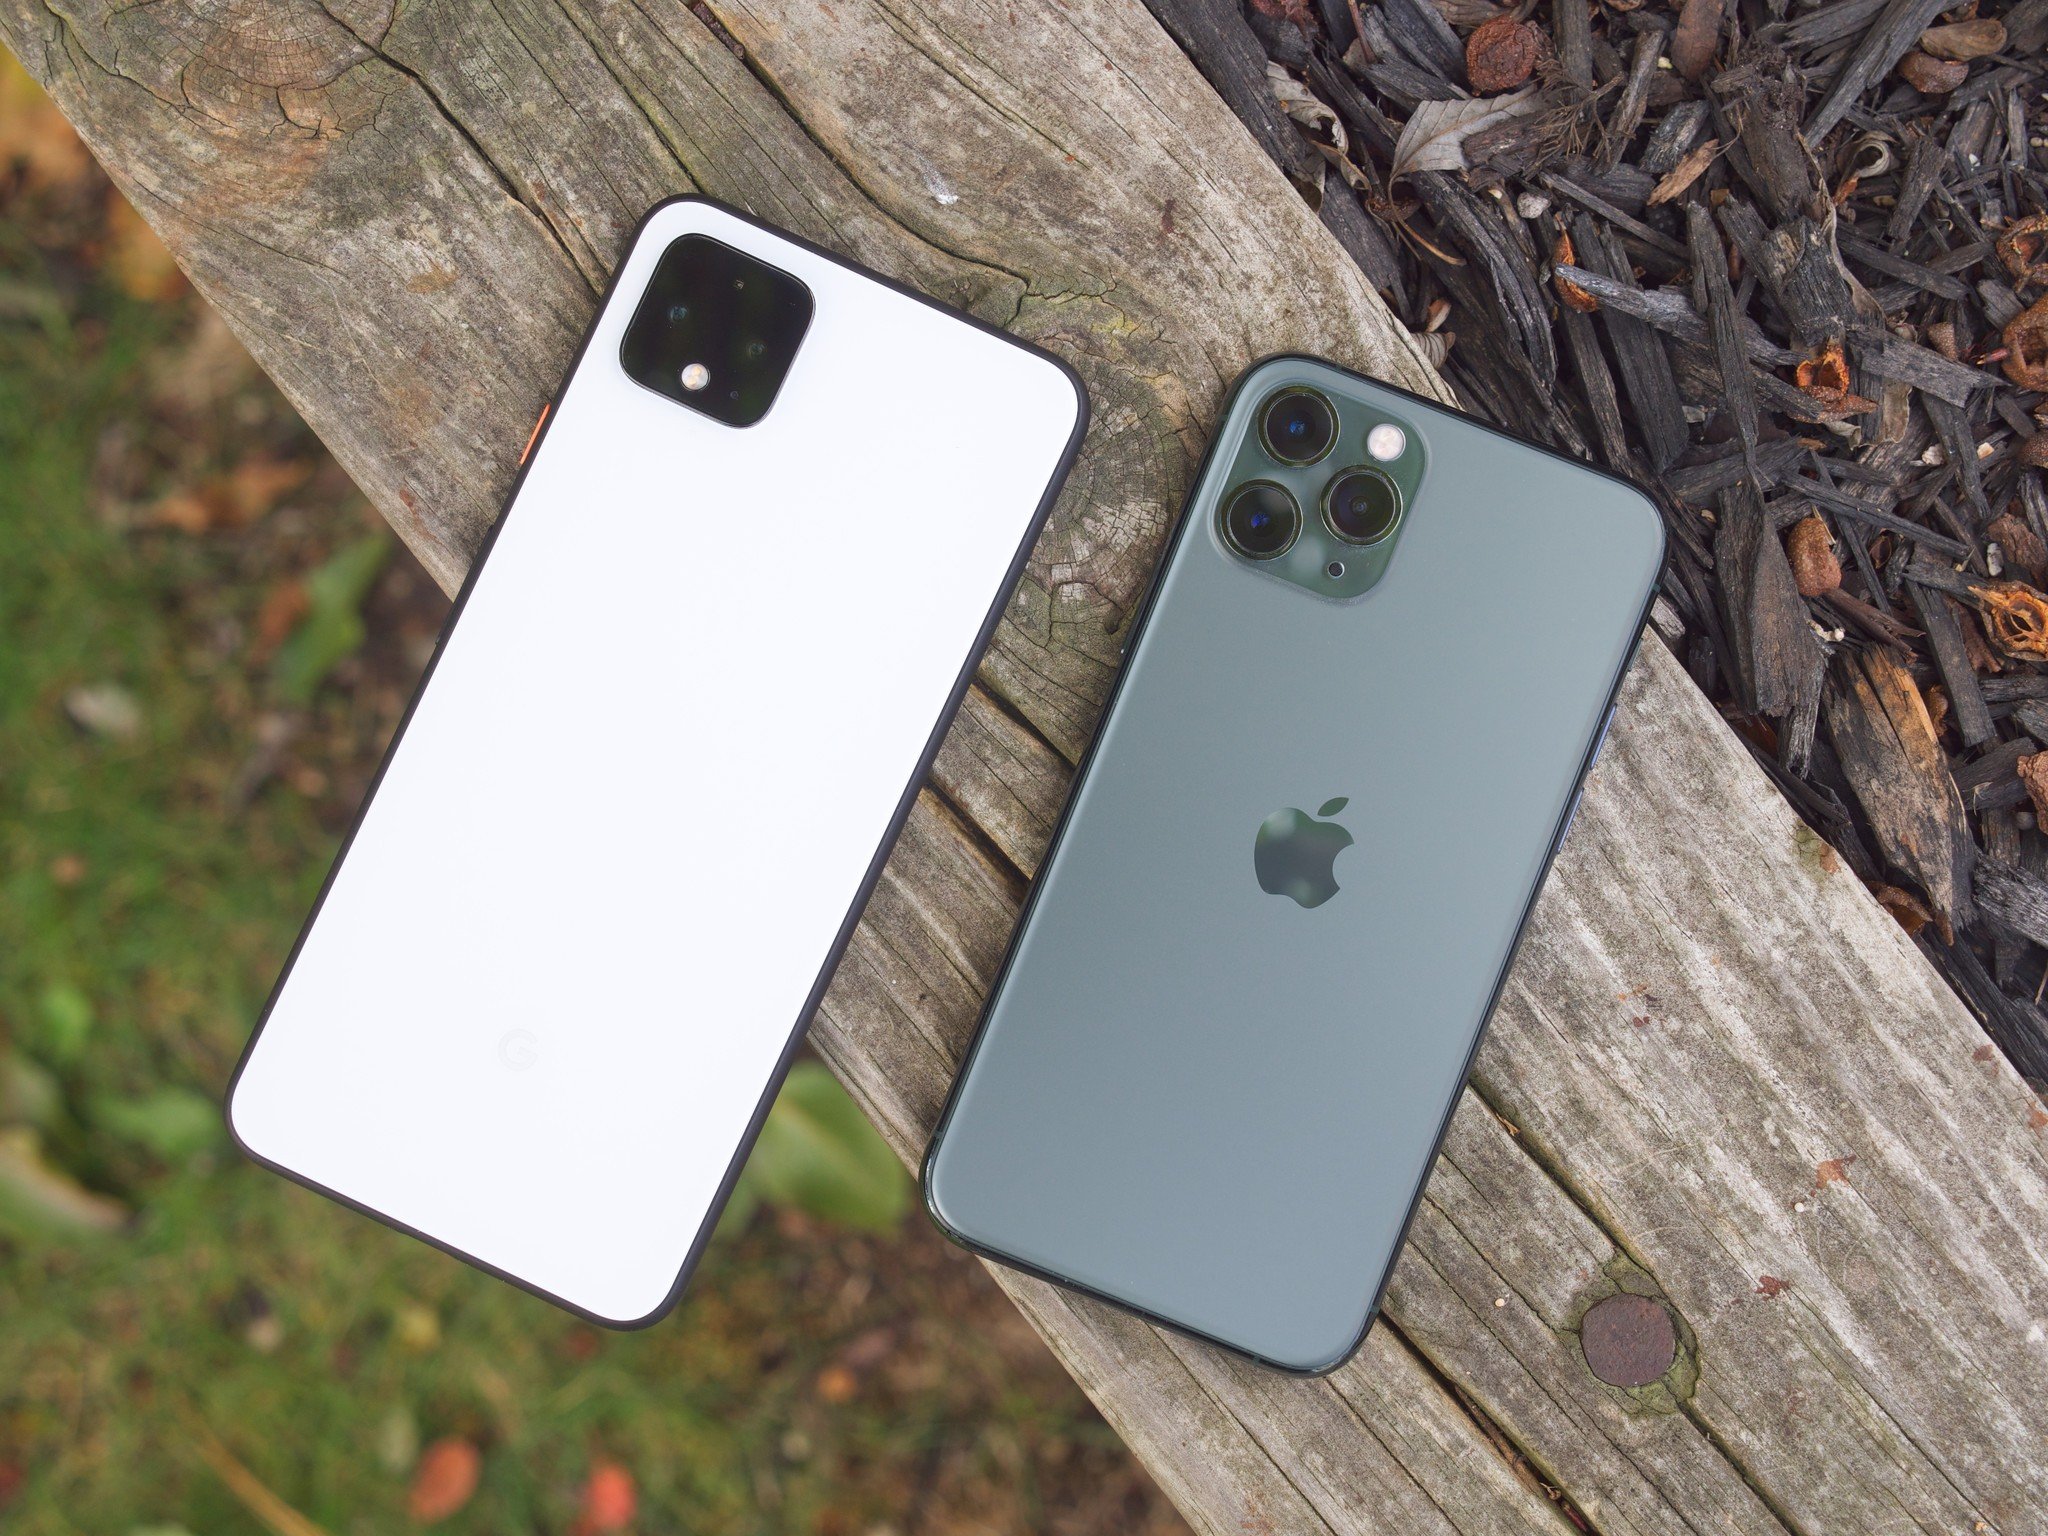 iPhone 11 Pro and Google Pixel 4 XL